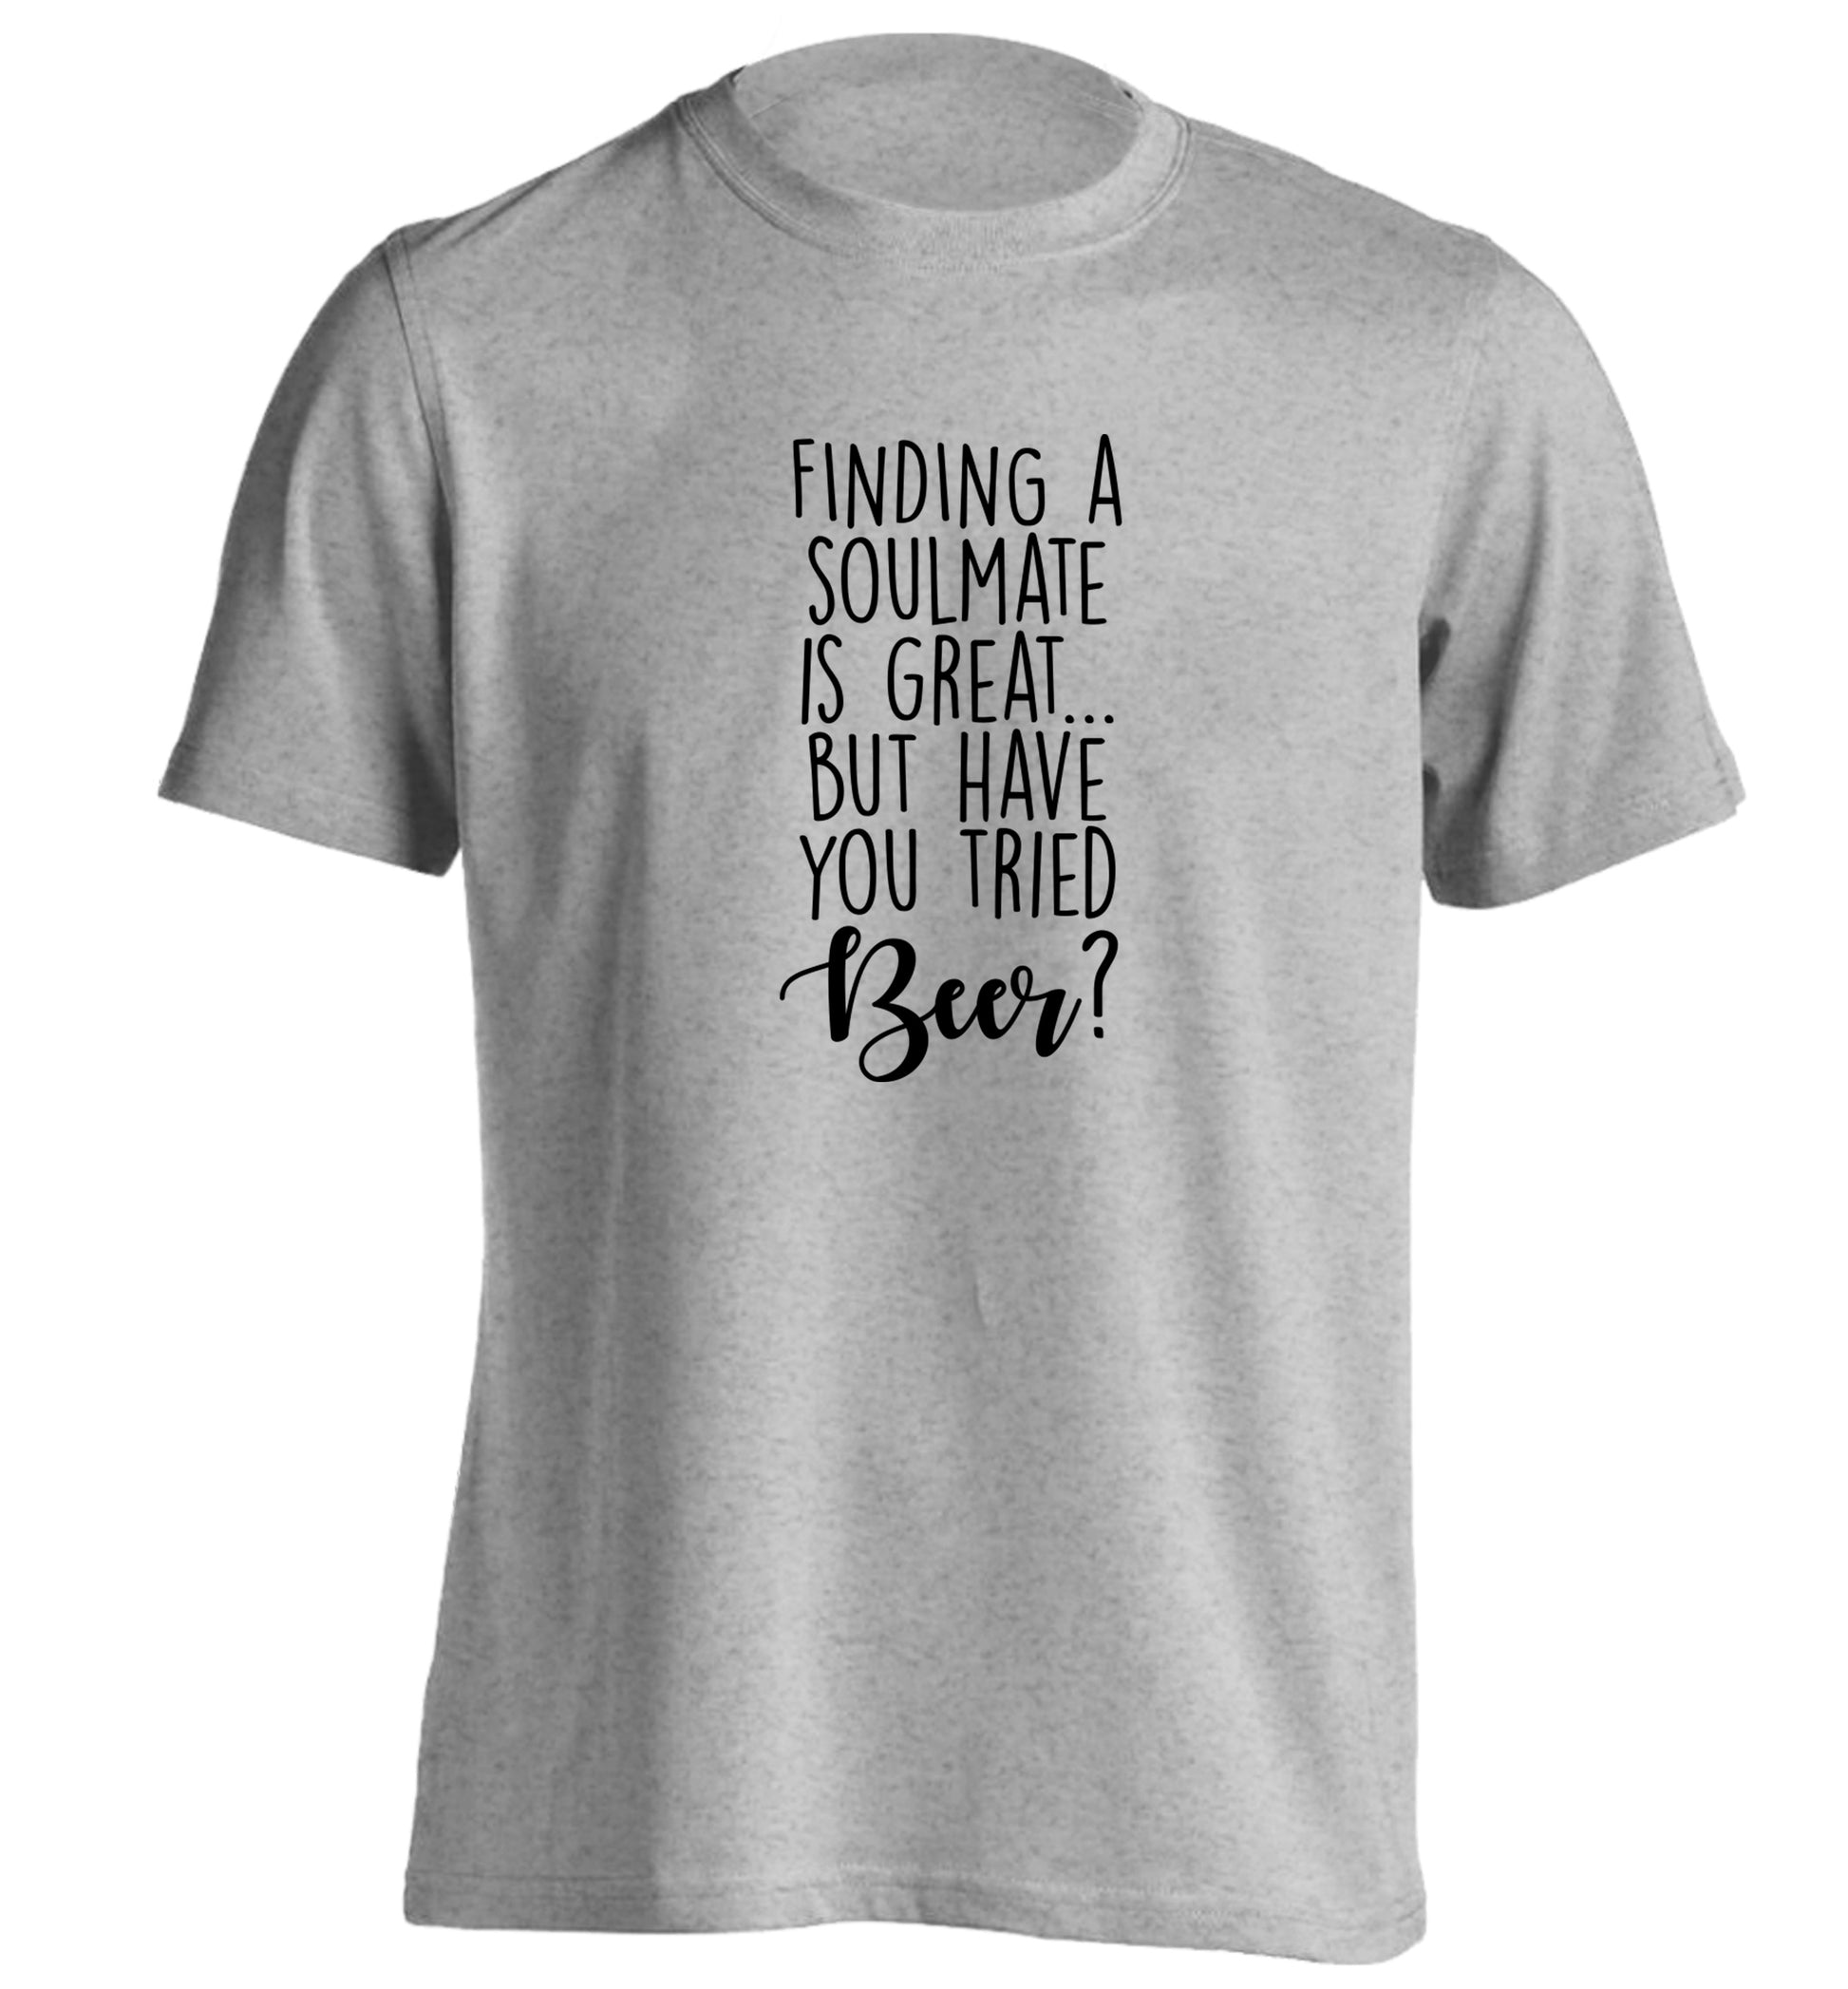 Finding a soulmate is great but have you tried beer? adults unisex grey Tshirt 2XL